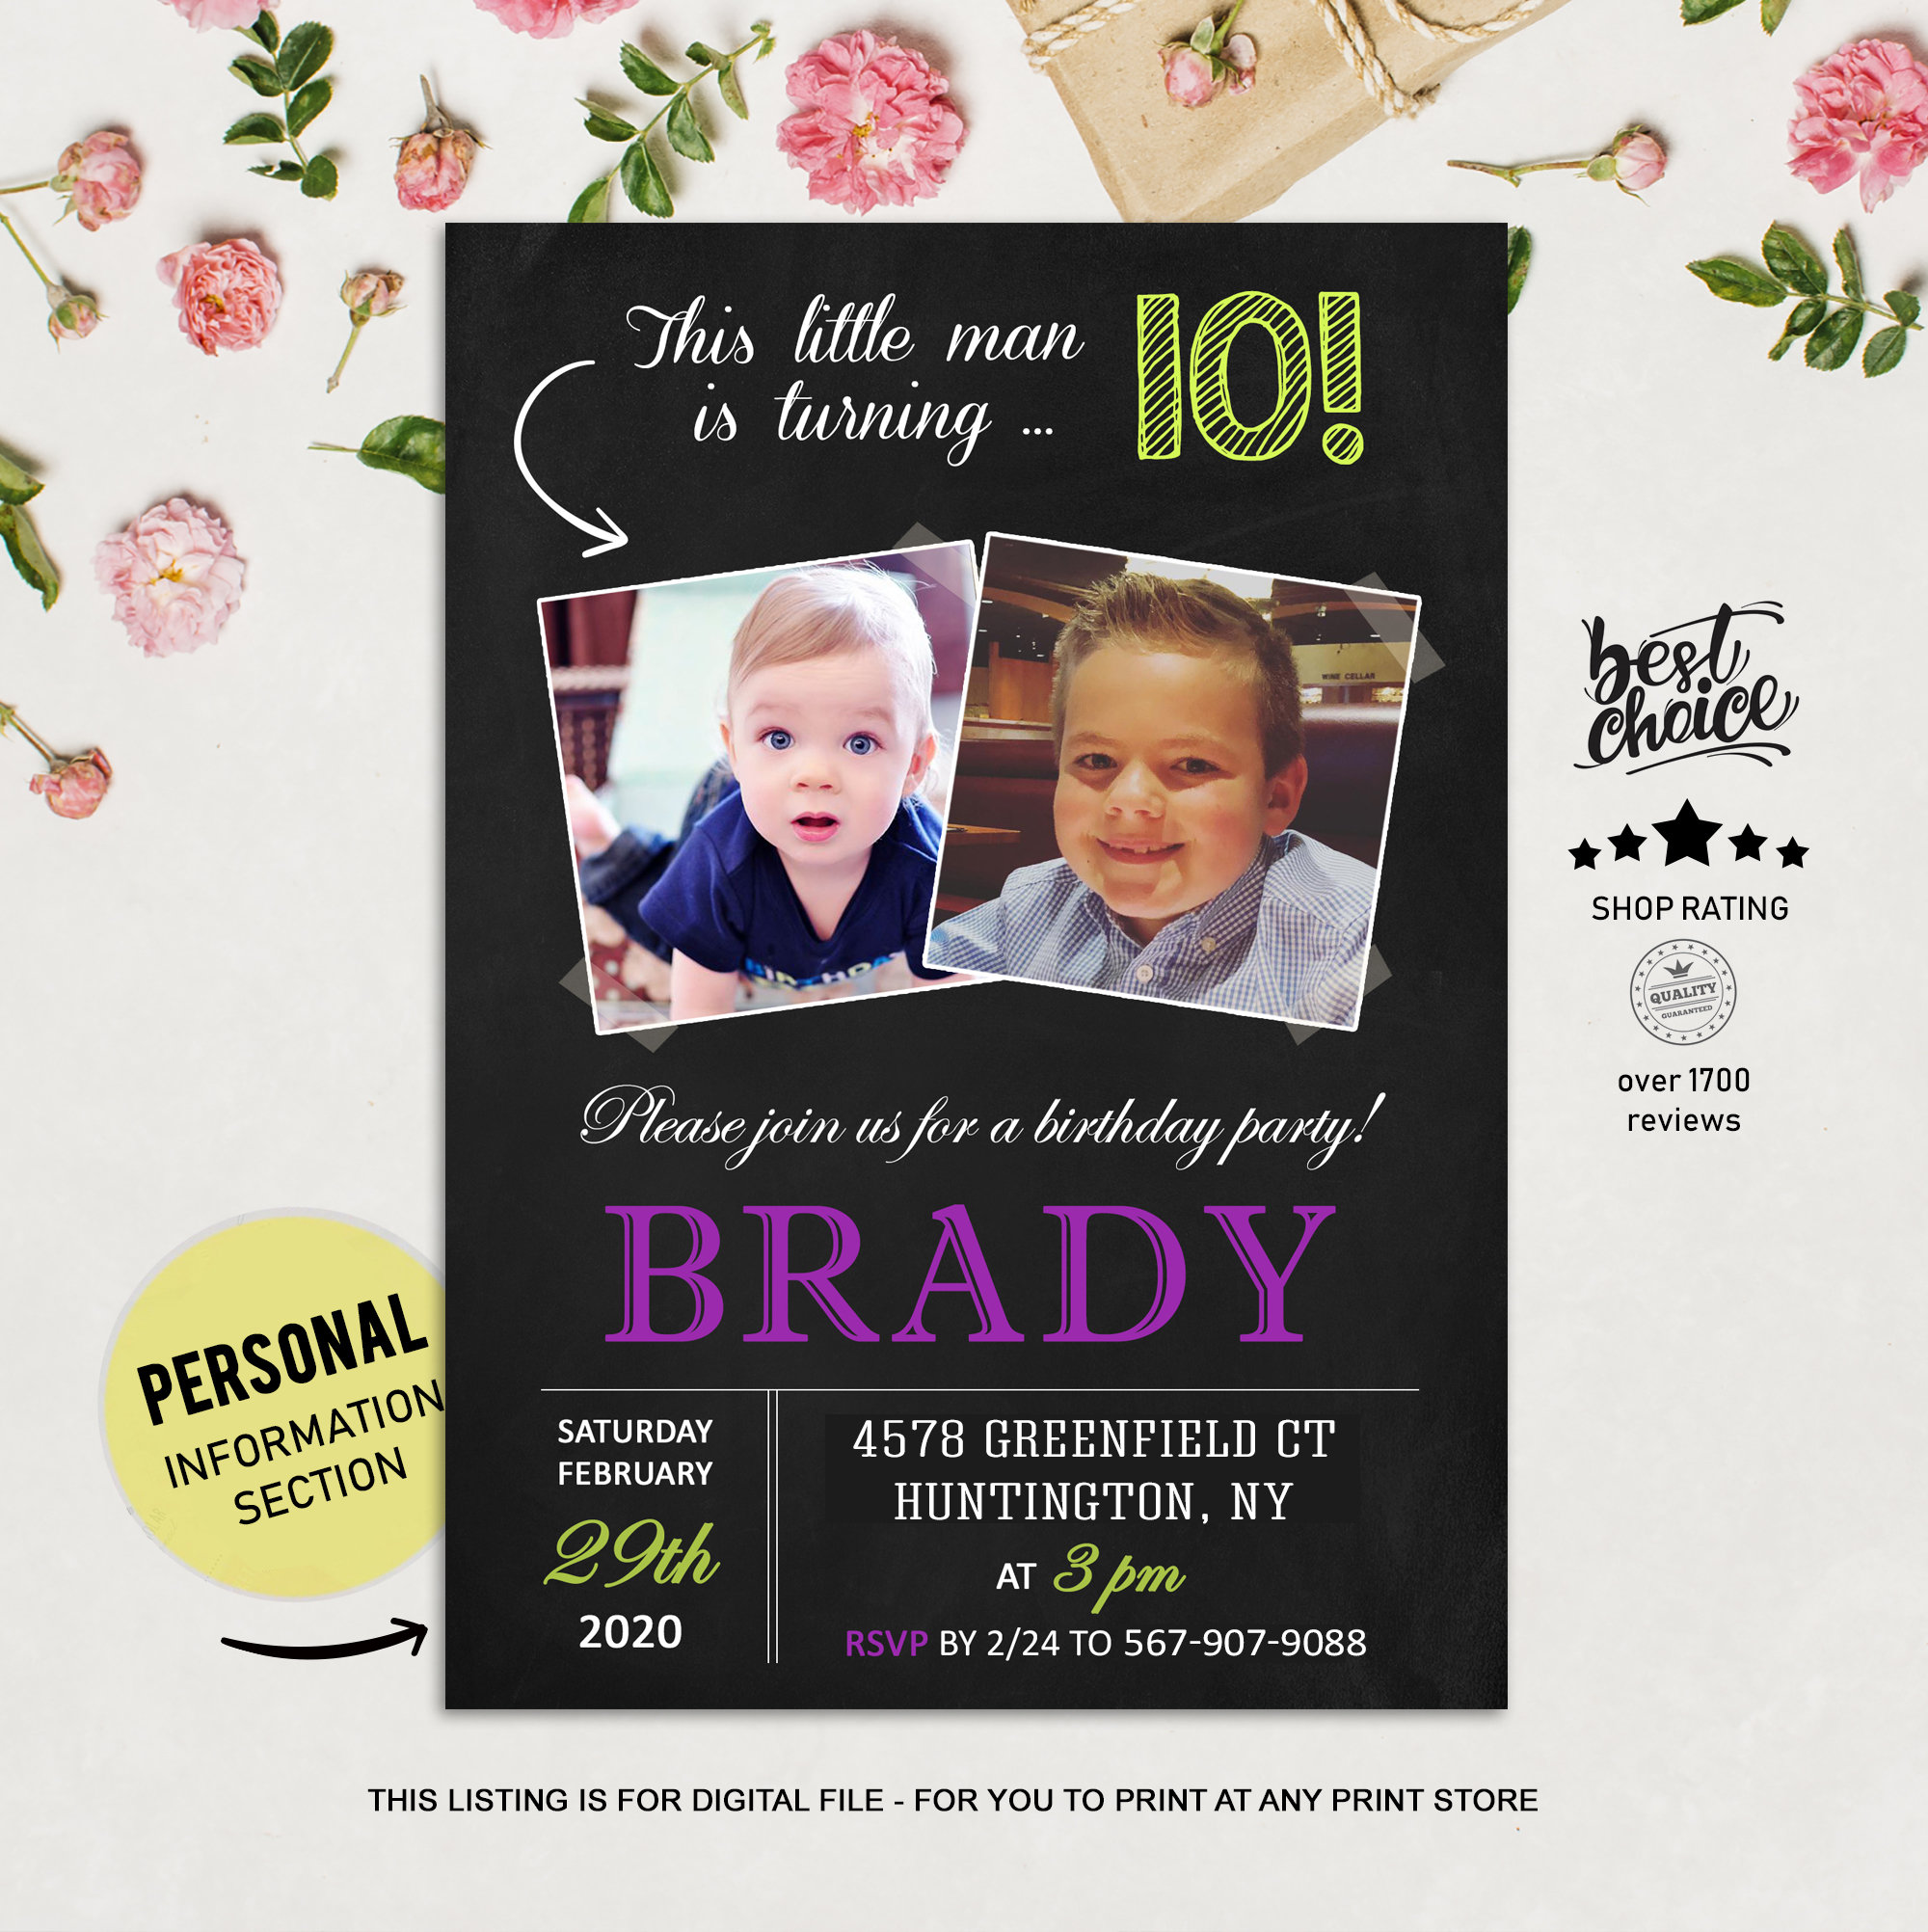 10th Birthday Invitations with picture for boys Personalized | Etsy